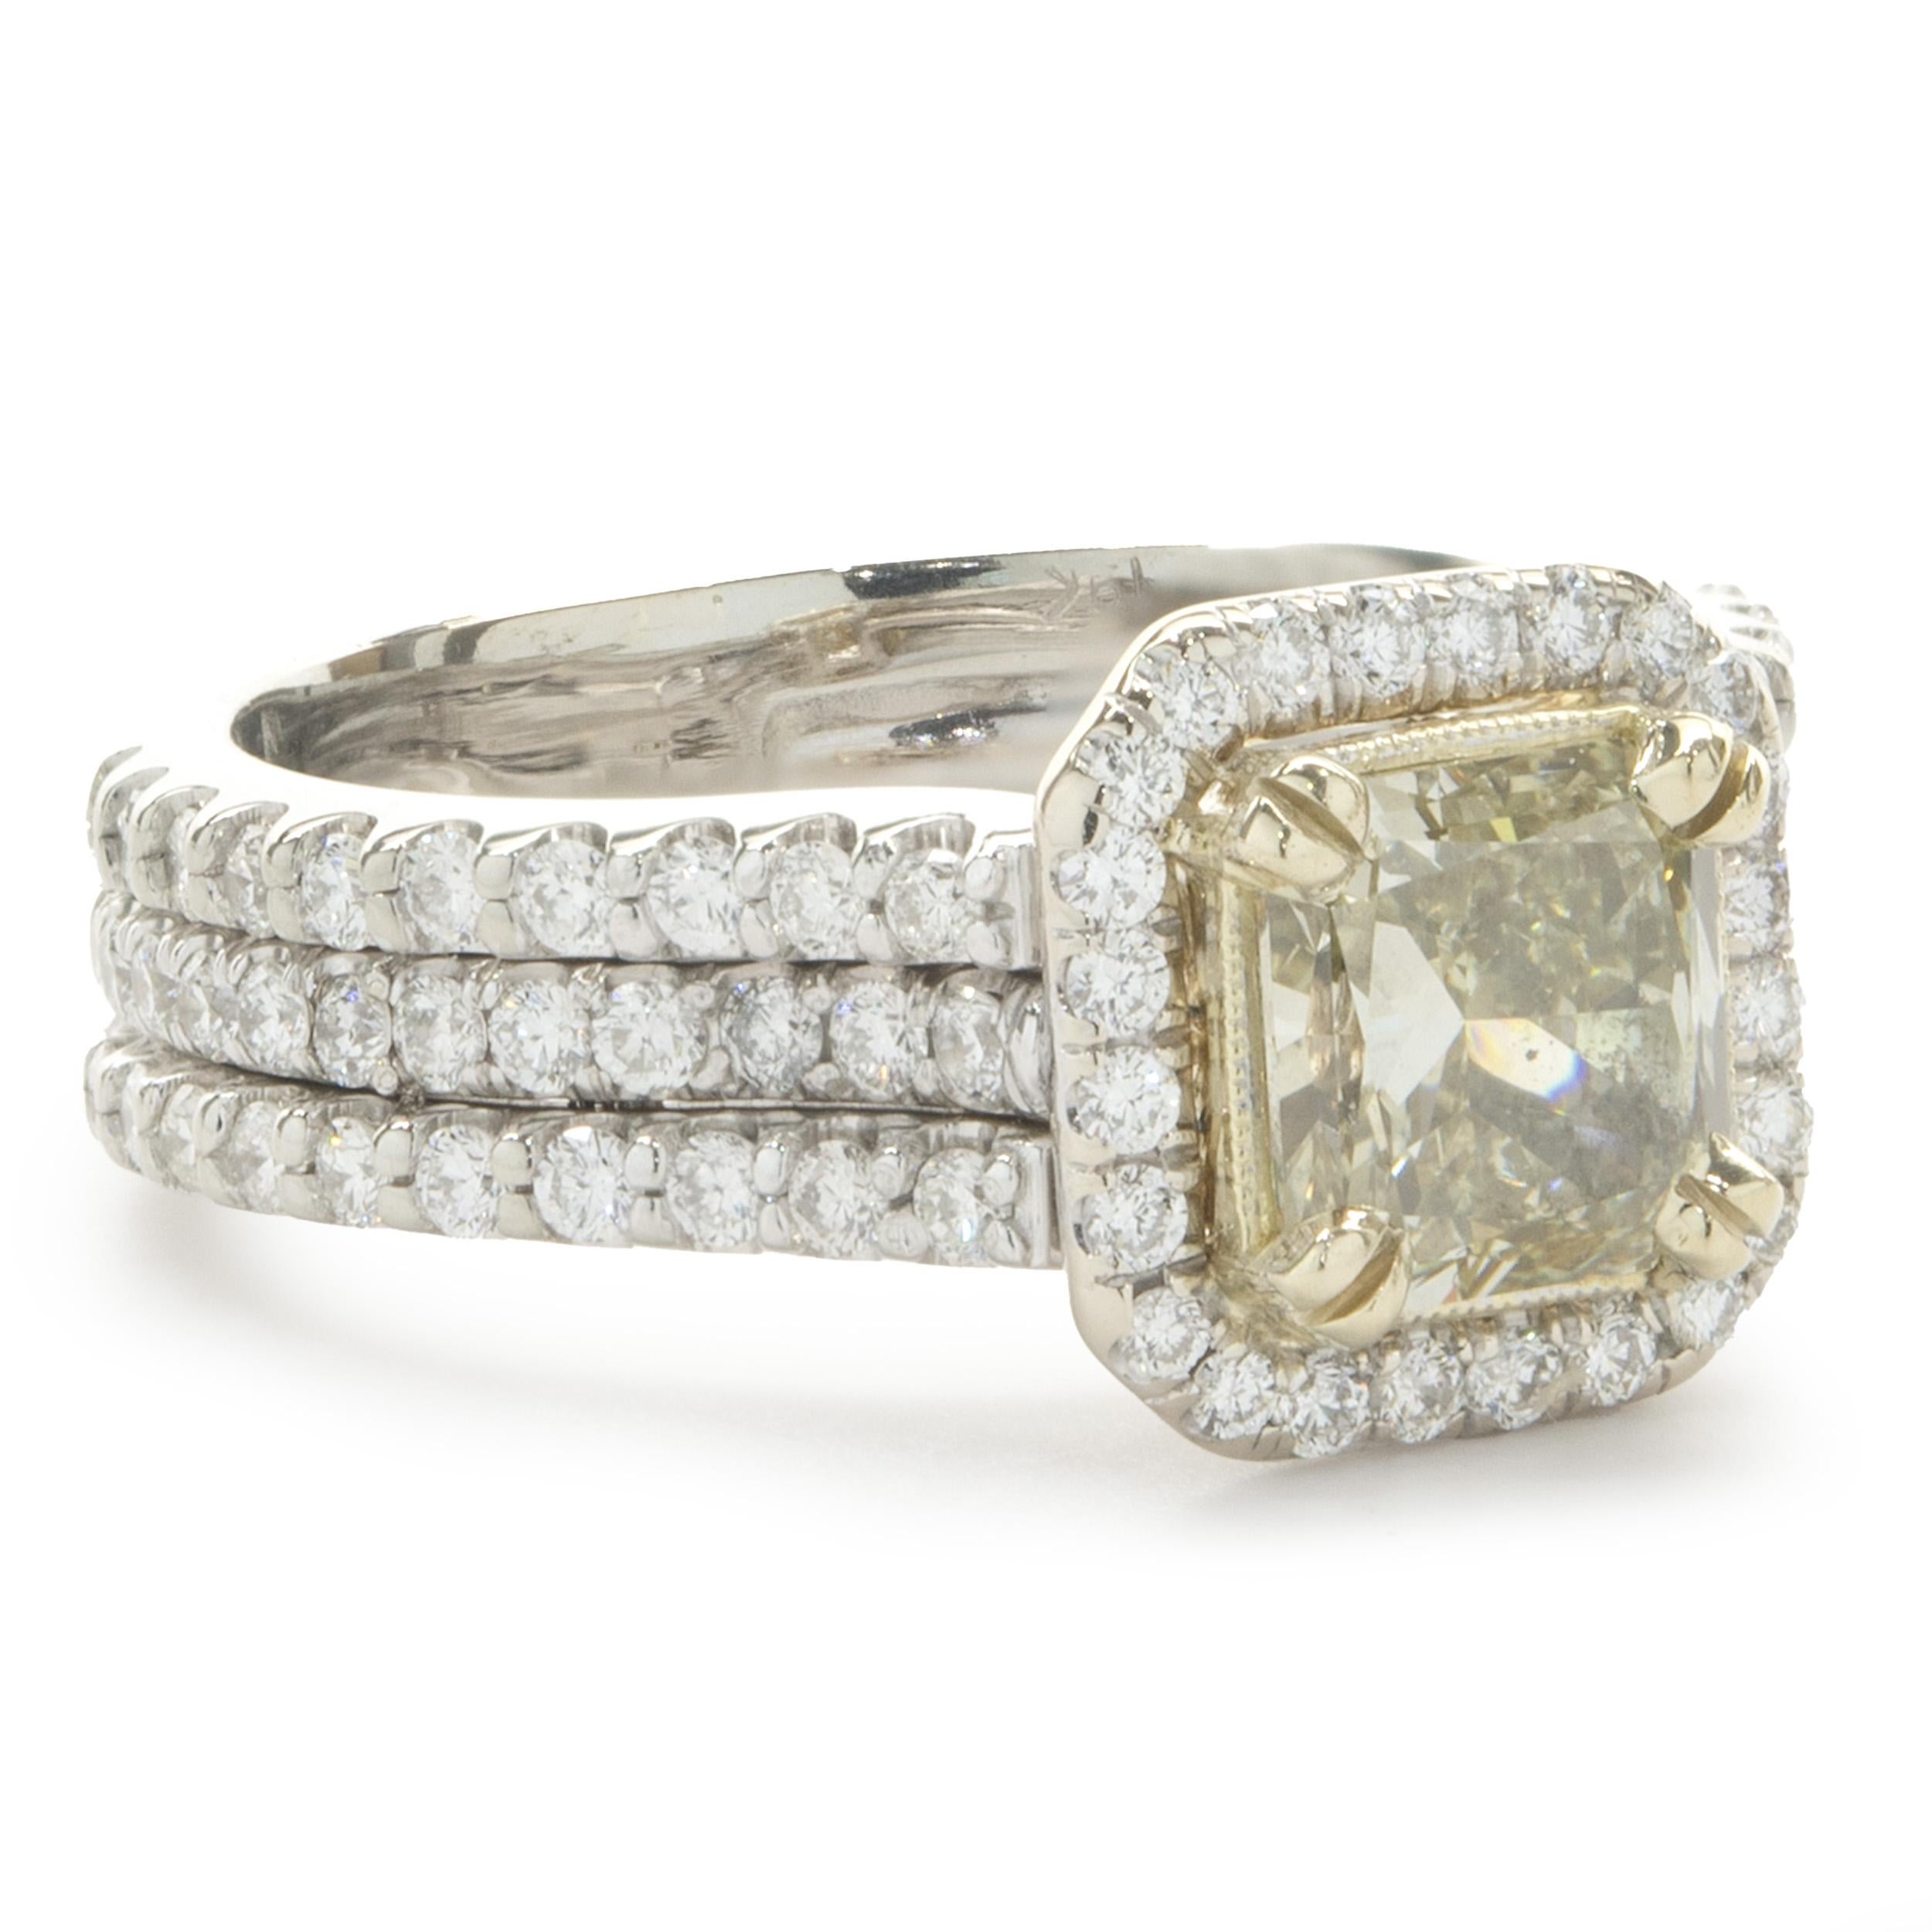 Designer: custom
Material: 18K white & yellow gold
Diamond: 1 radiant cut = 1.56ct
Color: Fancy Yellow
Clarity: VS2
Diamond: 88 round brilliant = 1.57cttw 
Color: G
Clarity: SI1
Ring Size: 7 (please allow two additional shipping days for sizing